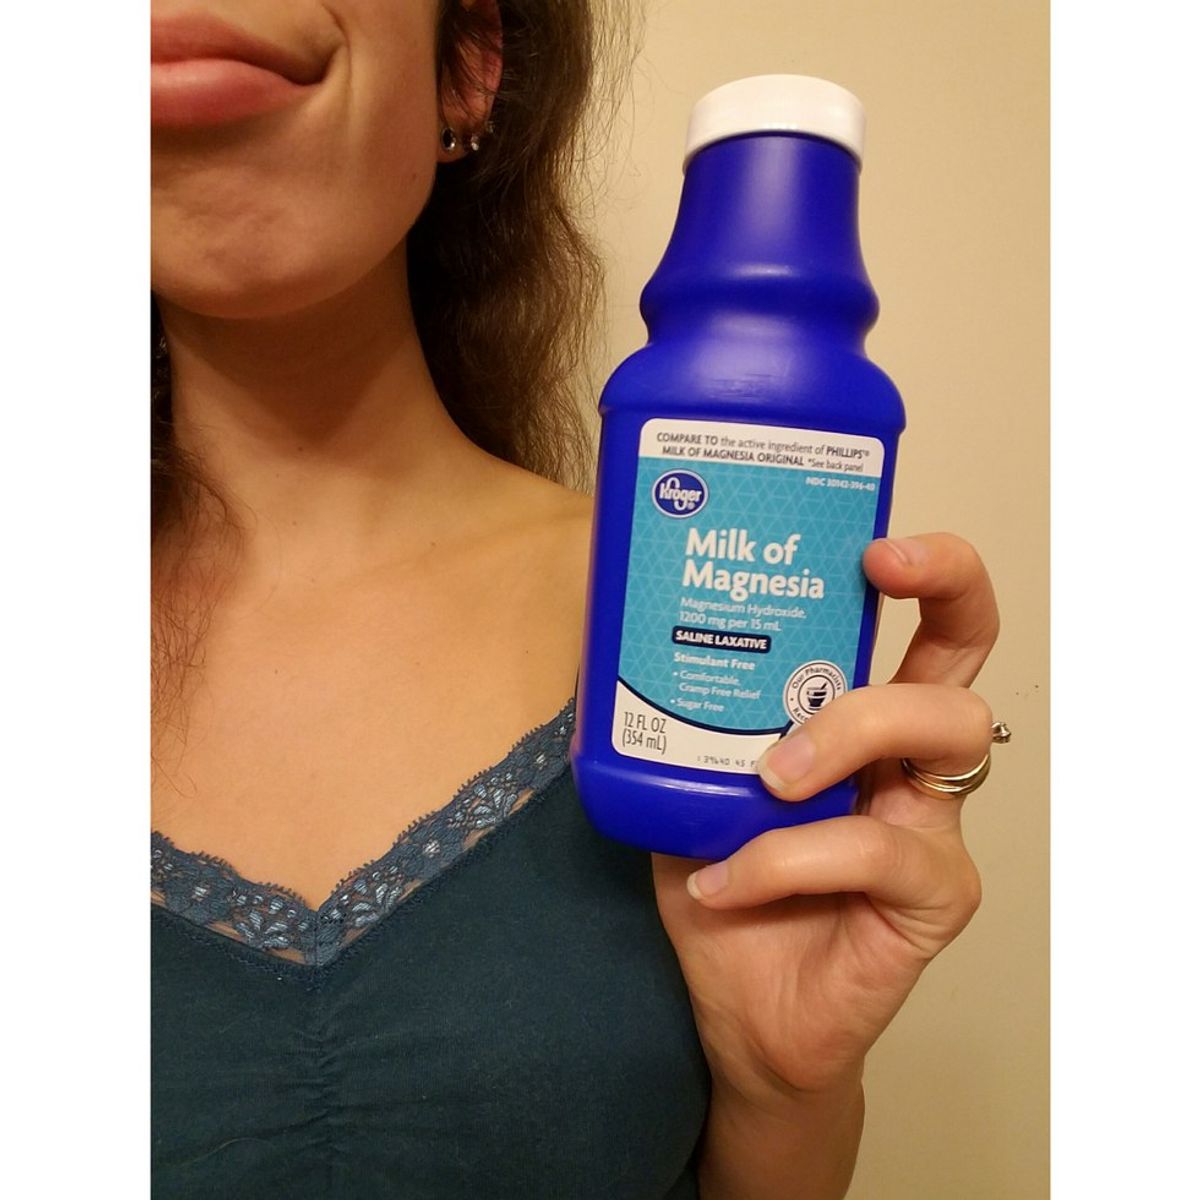 Milk of Magnesia Is A Perfect Deodorant And I'm Mad I Just Found Out